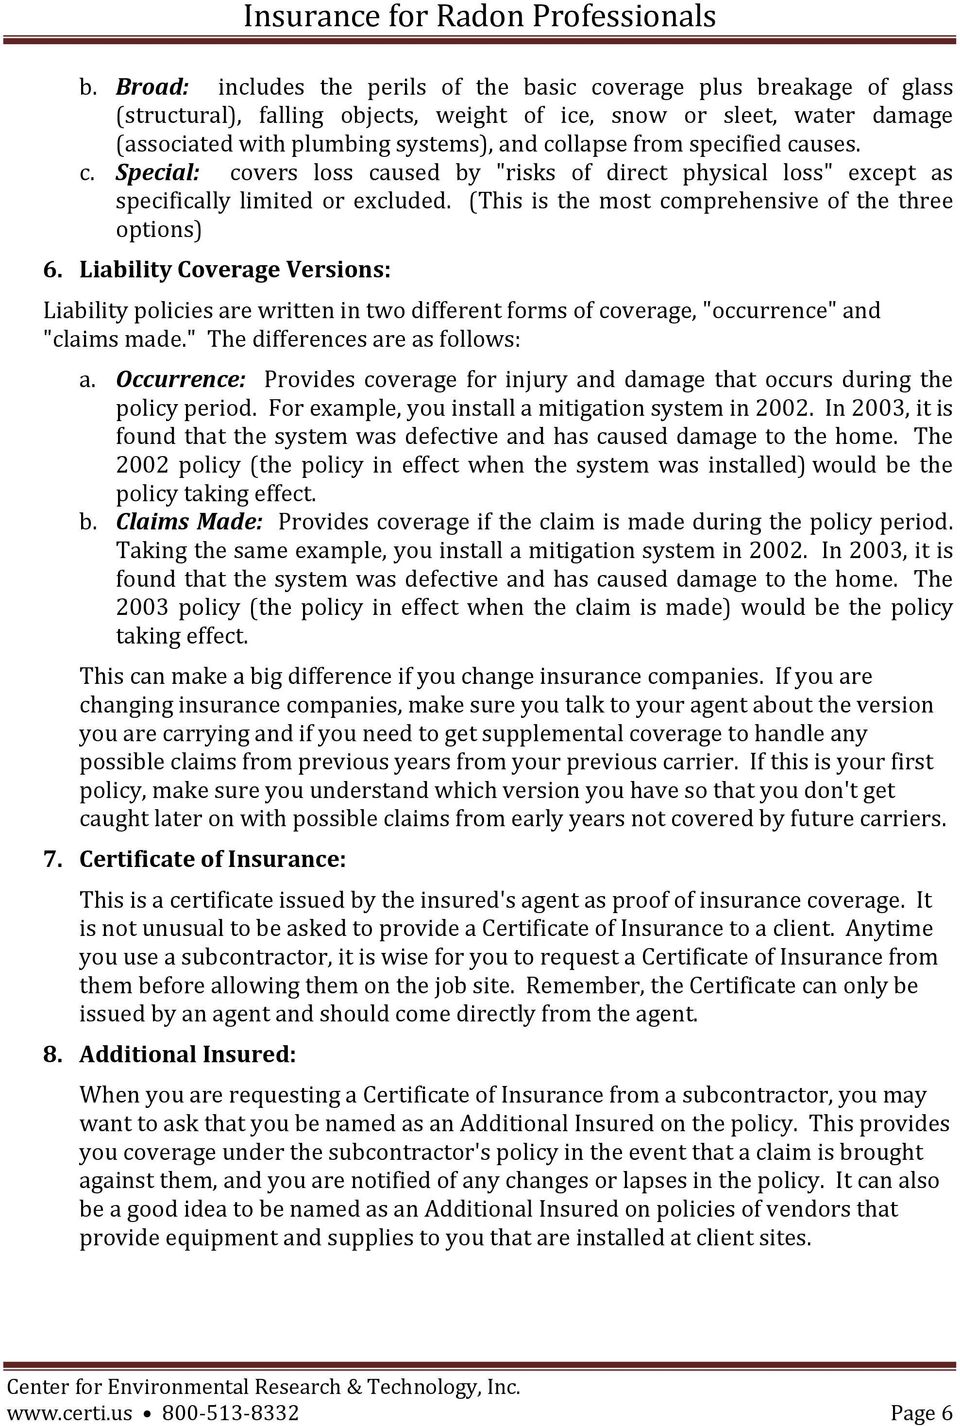 Liability Coverage Versions: Liability policies are written in two different forms of coverage, "occurrence" and "claims made." The differences are as follows: a.